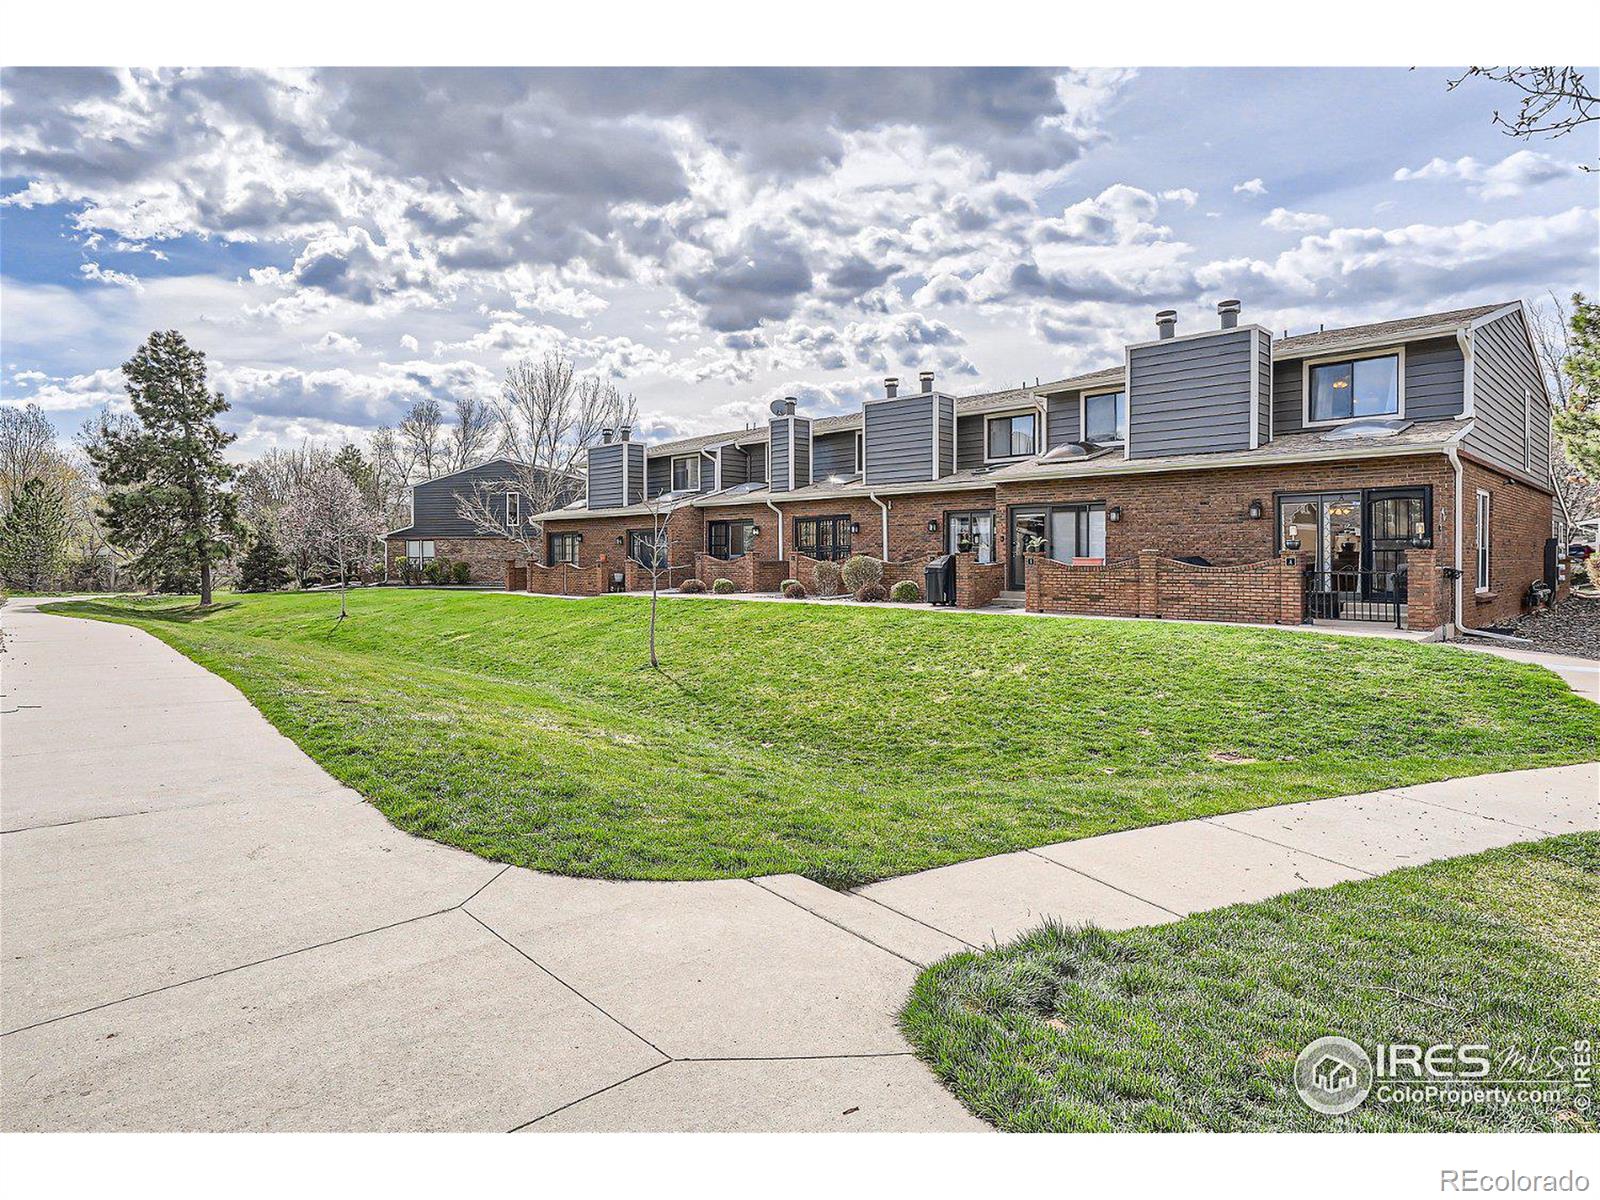 11555 W 70th Place A, Arvada  MLS: 4567891007817 Beds: 2 Baths: 2 Price: $425,000